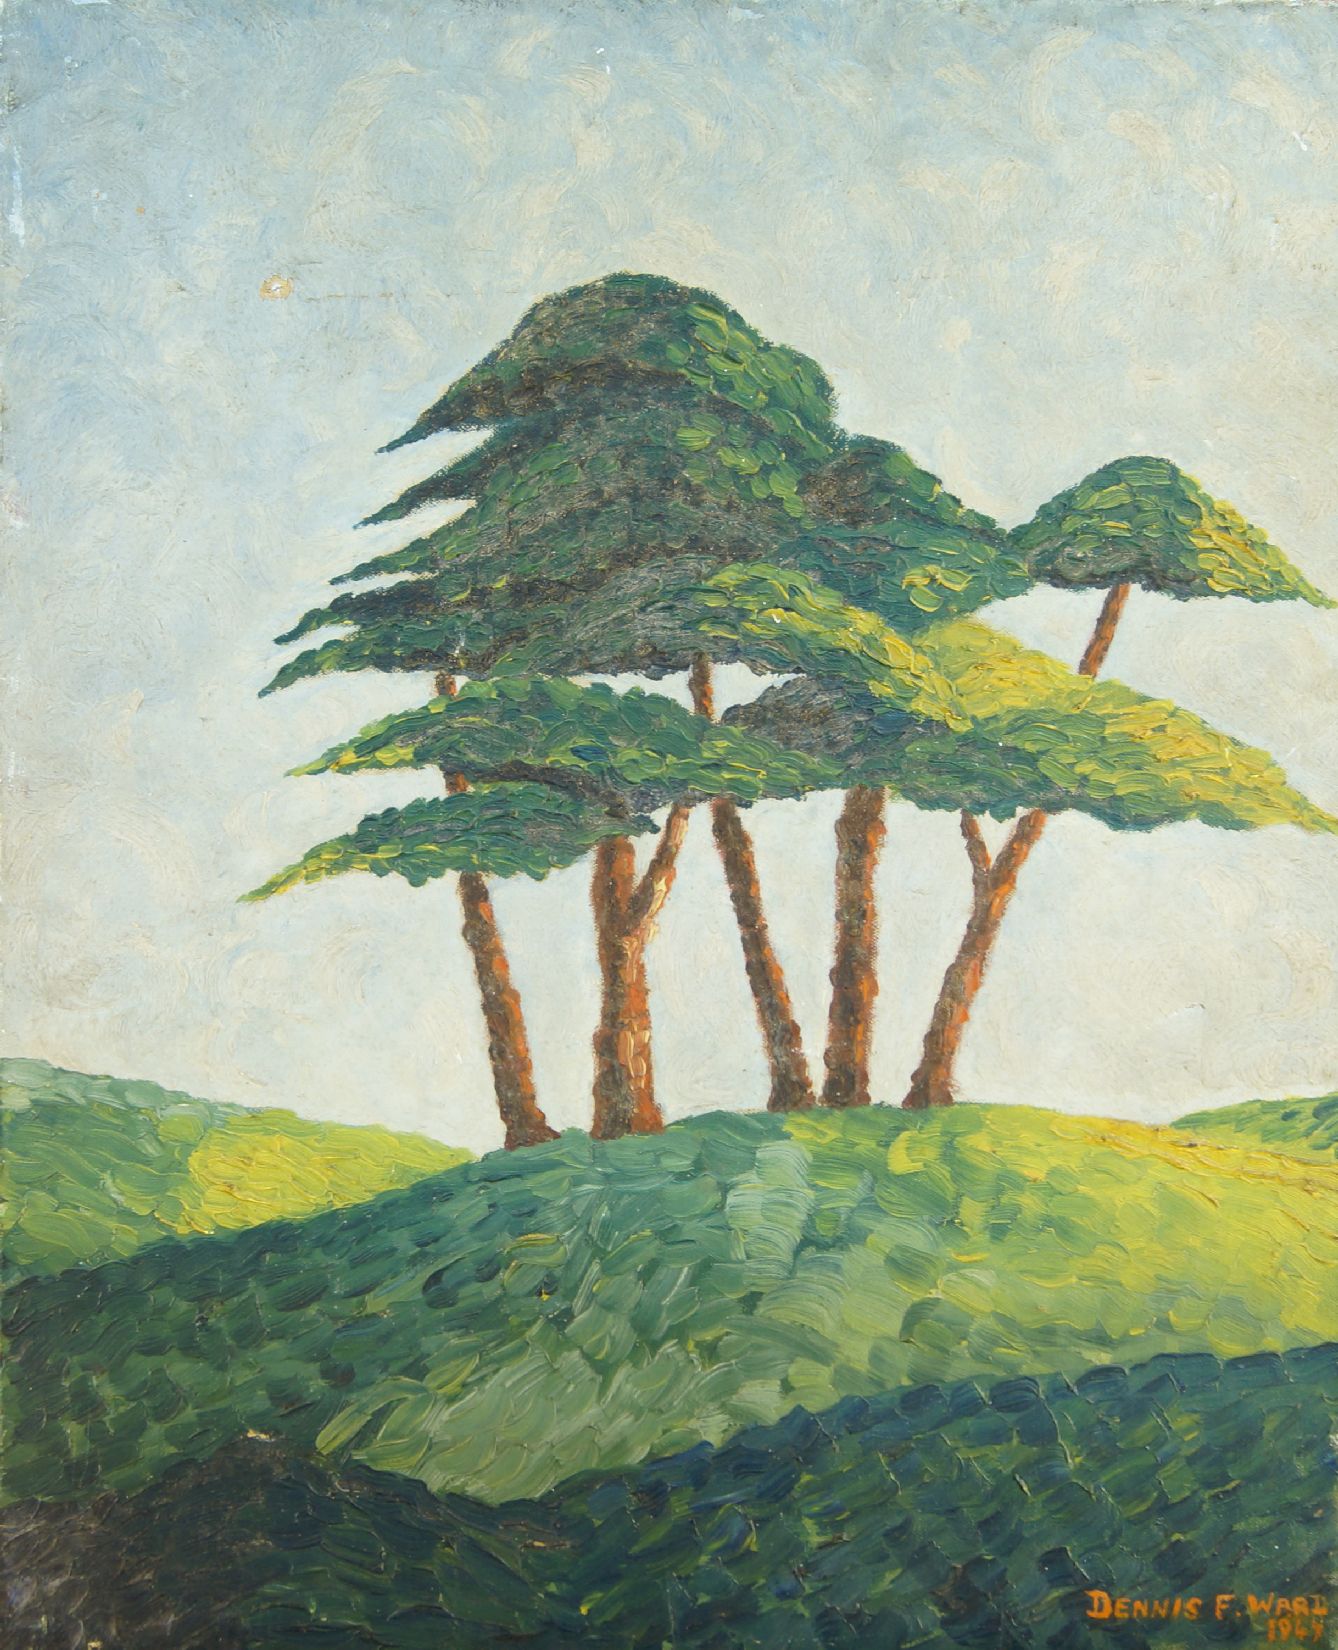 Dennis Ward, British, mid-20th century- Tree on a Hill, 1947; oil on canvas, signed and dated